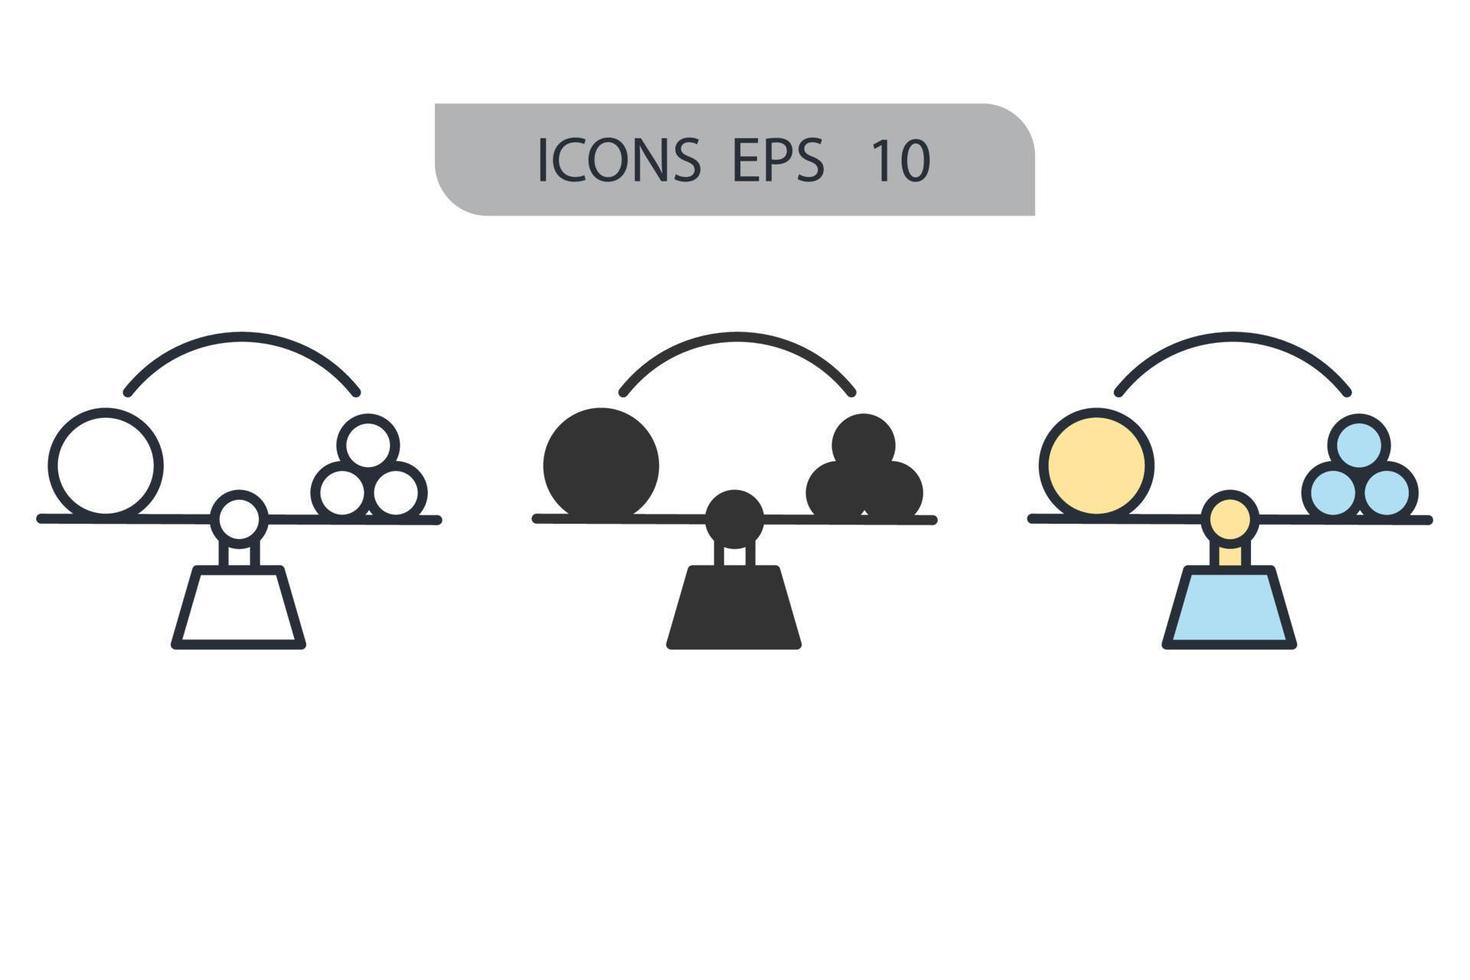 meta-learning icons  symbol vector elements for infographic web